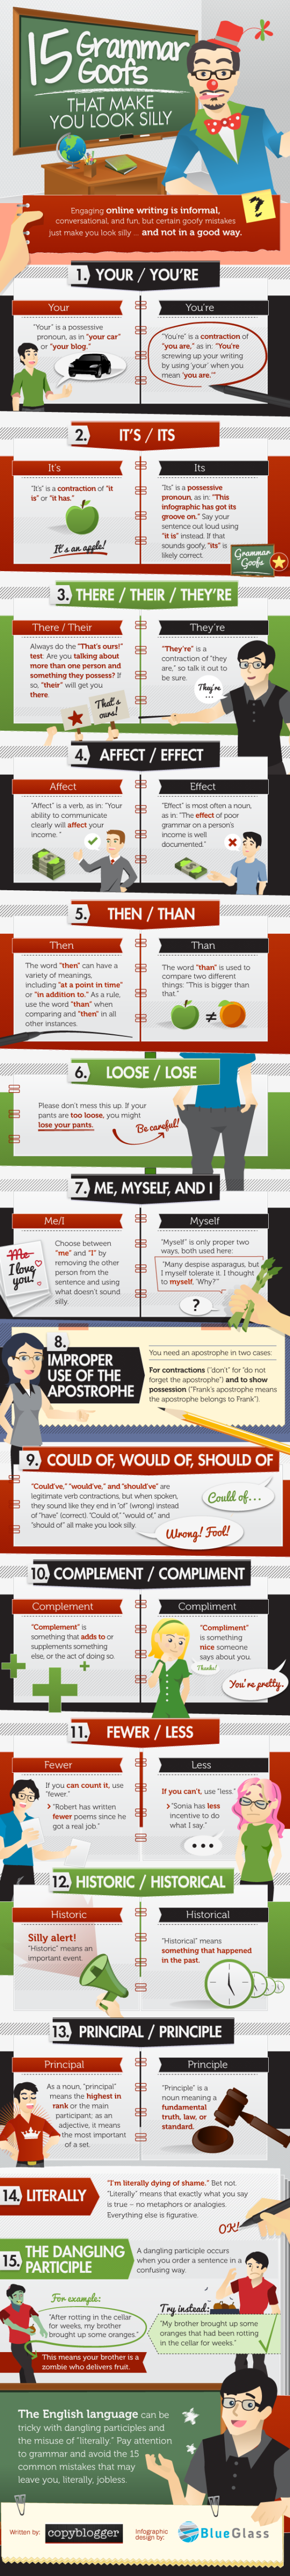 15 Grammar Goofs That Make You Look Silly - Infographic